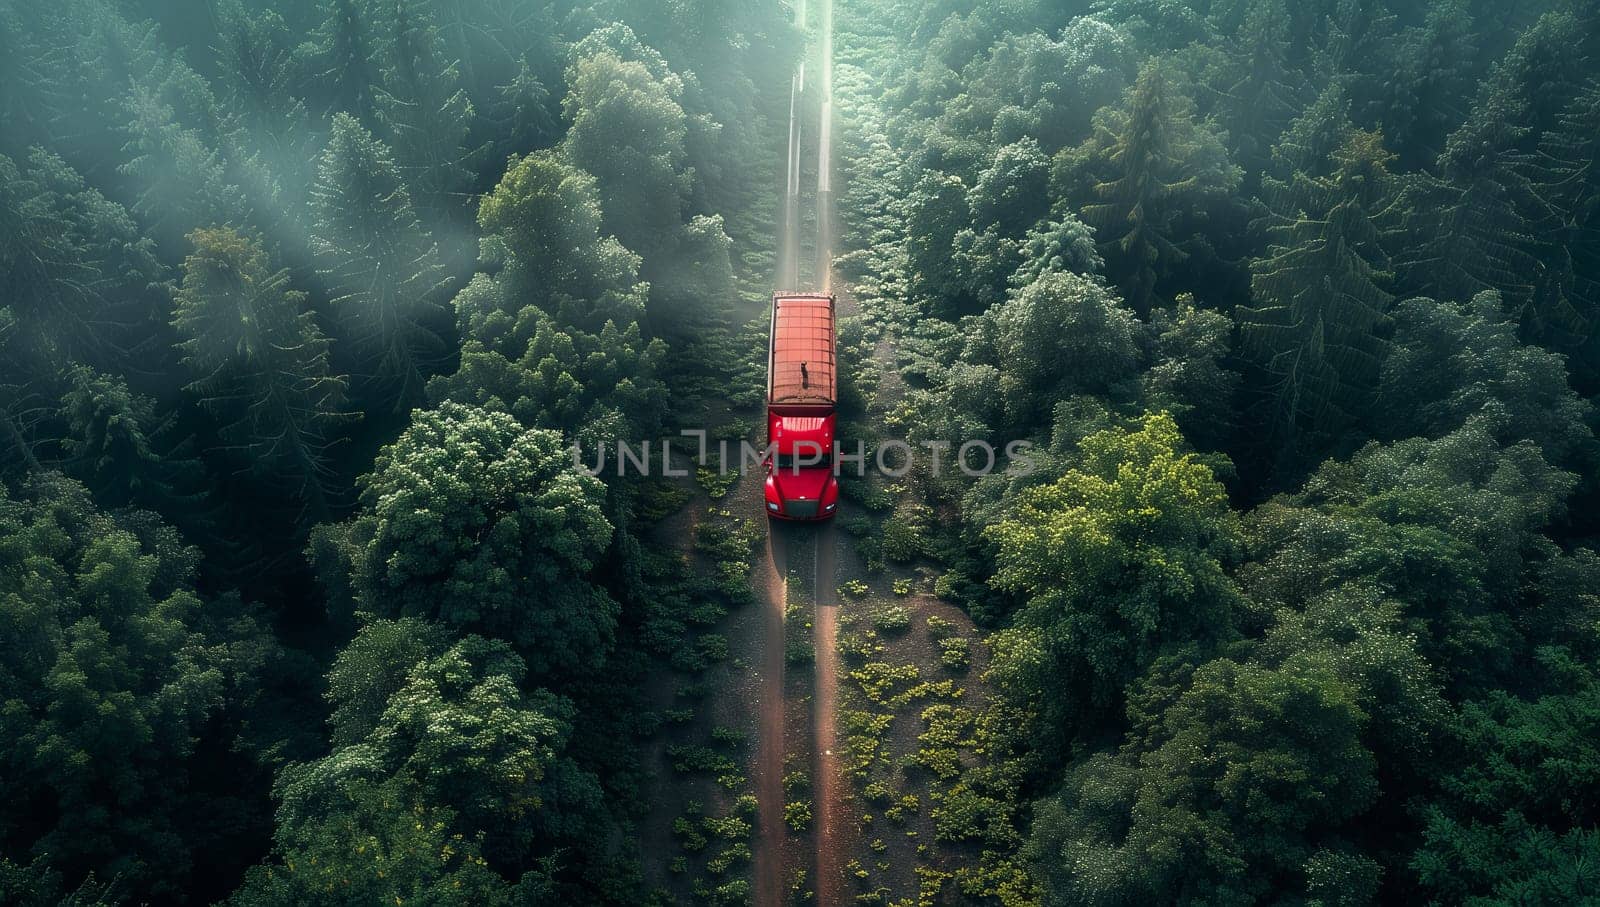 A red car is seen driving along a road surrounded by trees and greenery in a forest landscape